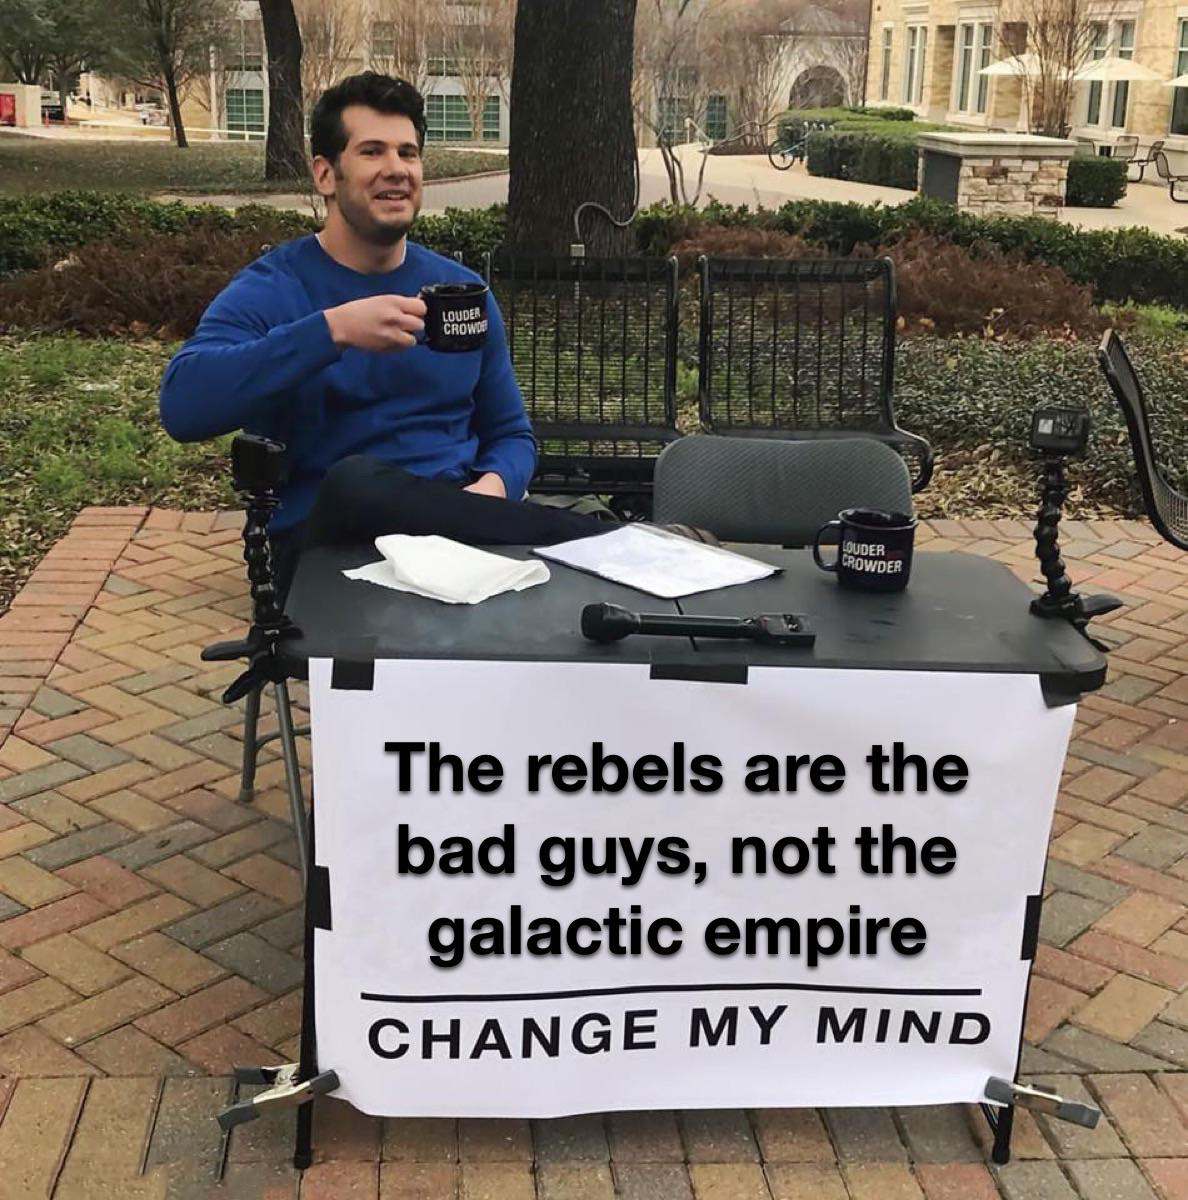 funny memes and pics - design quotes - Lo Ch Signiferner Resoury Martire Modek that we p Suder Crowder The rebels are the bad guys, not the galactic empire Change My Mind